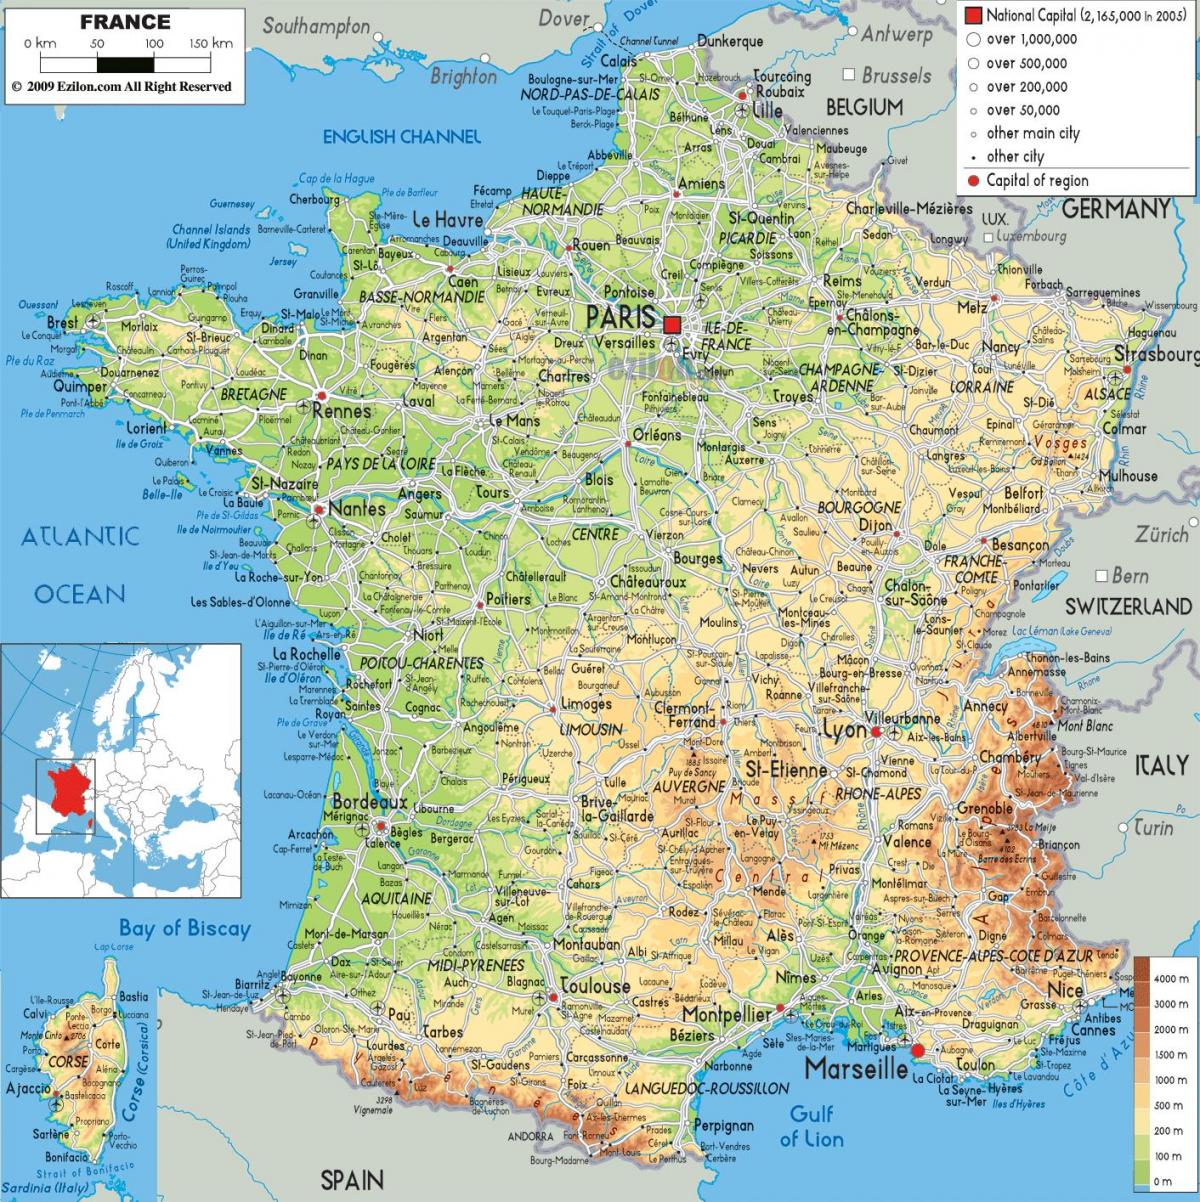 where is France on the map